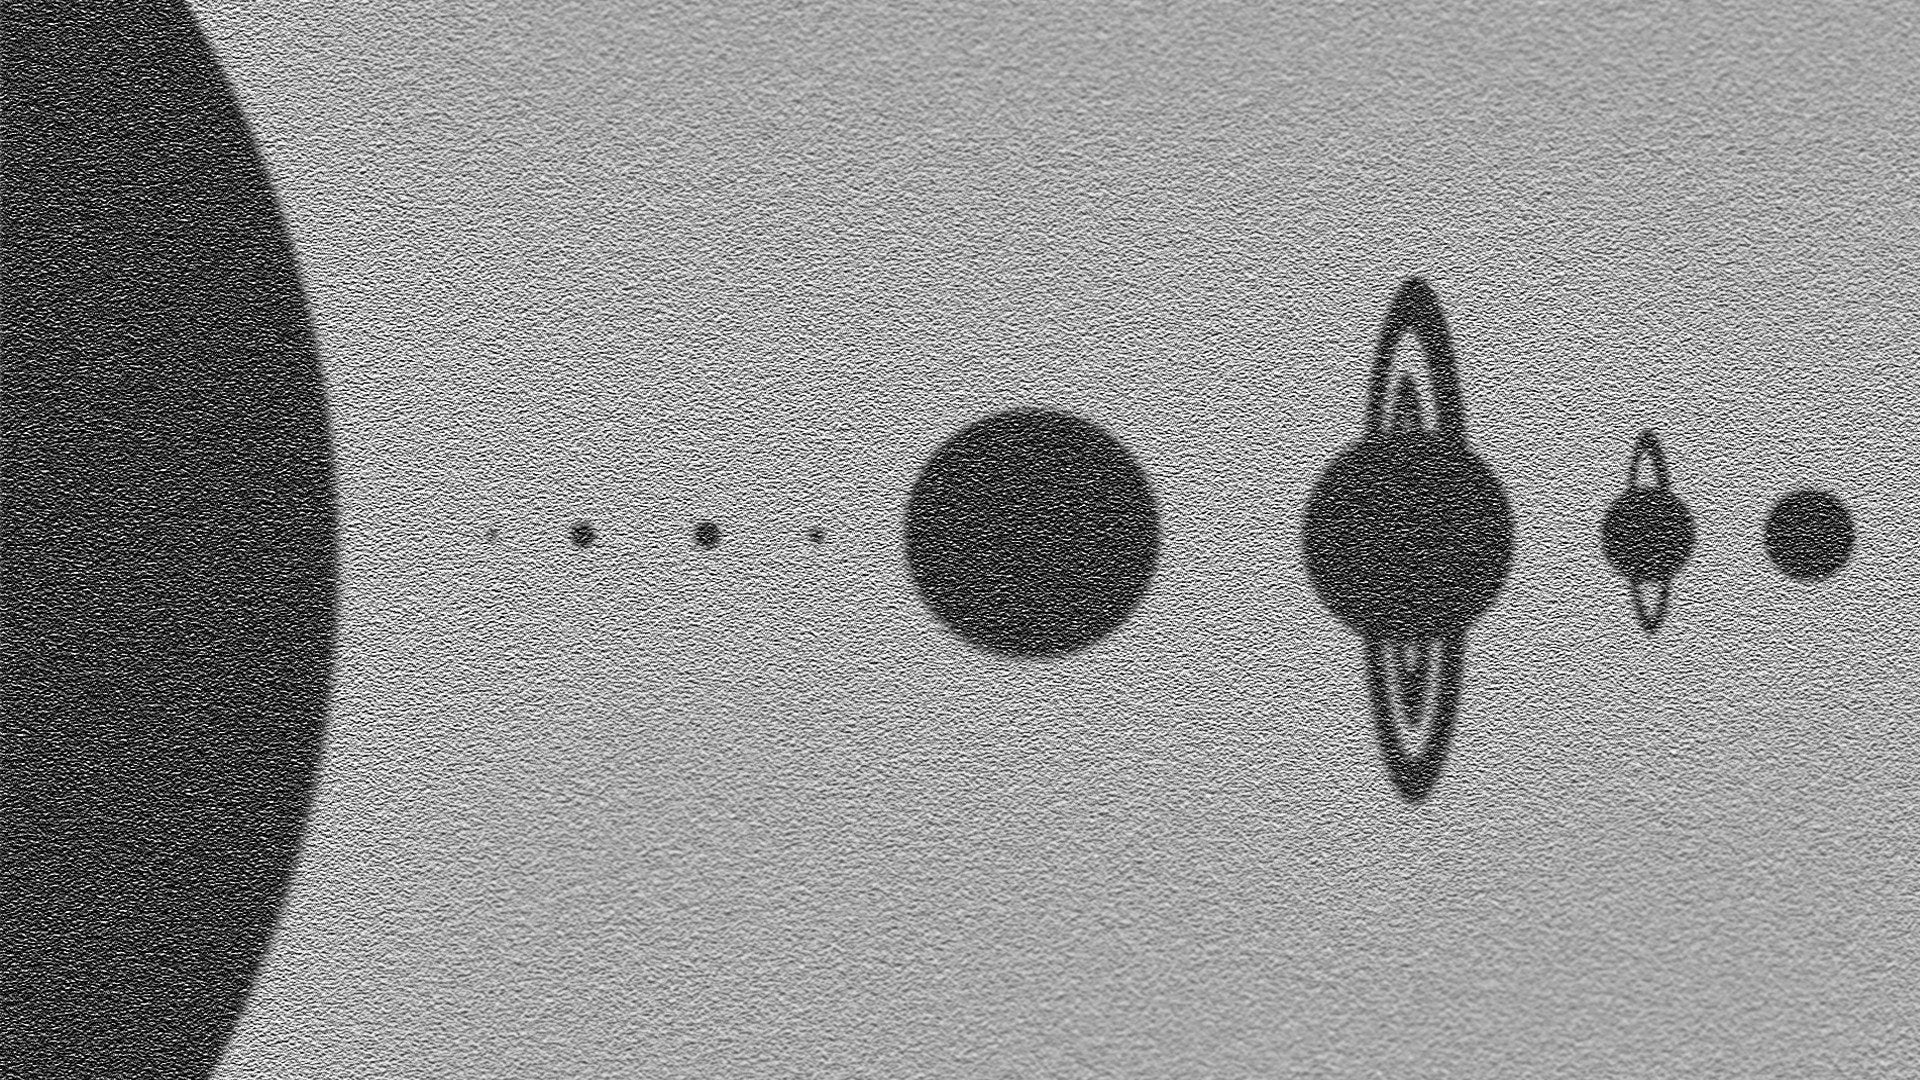 Minimal Solar System Wallpaper (size) scale, of course.: Astronomy